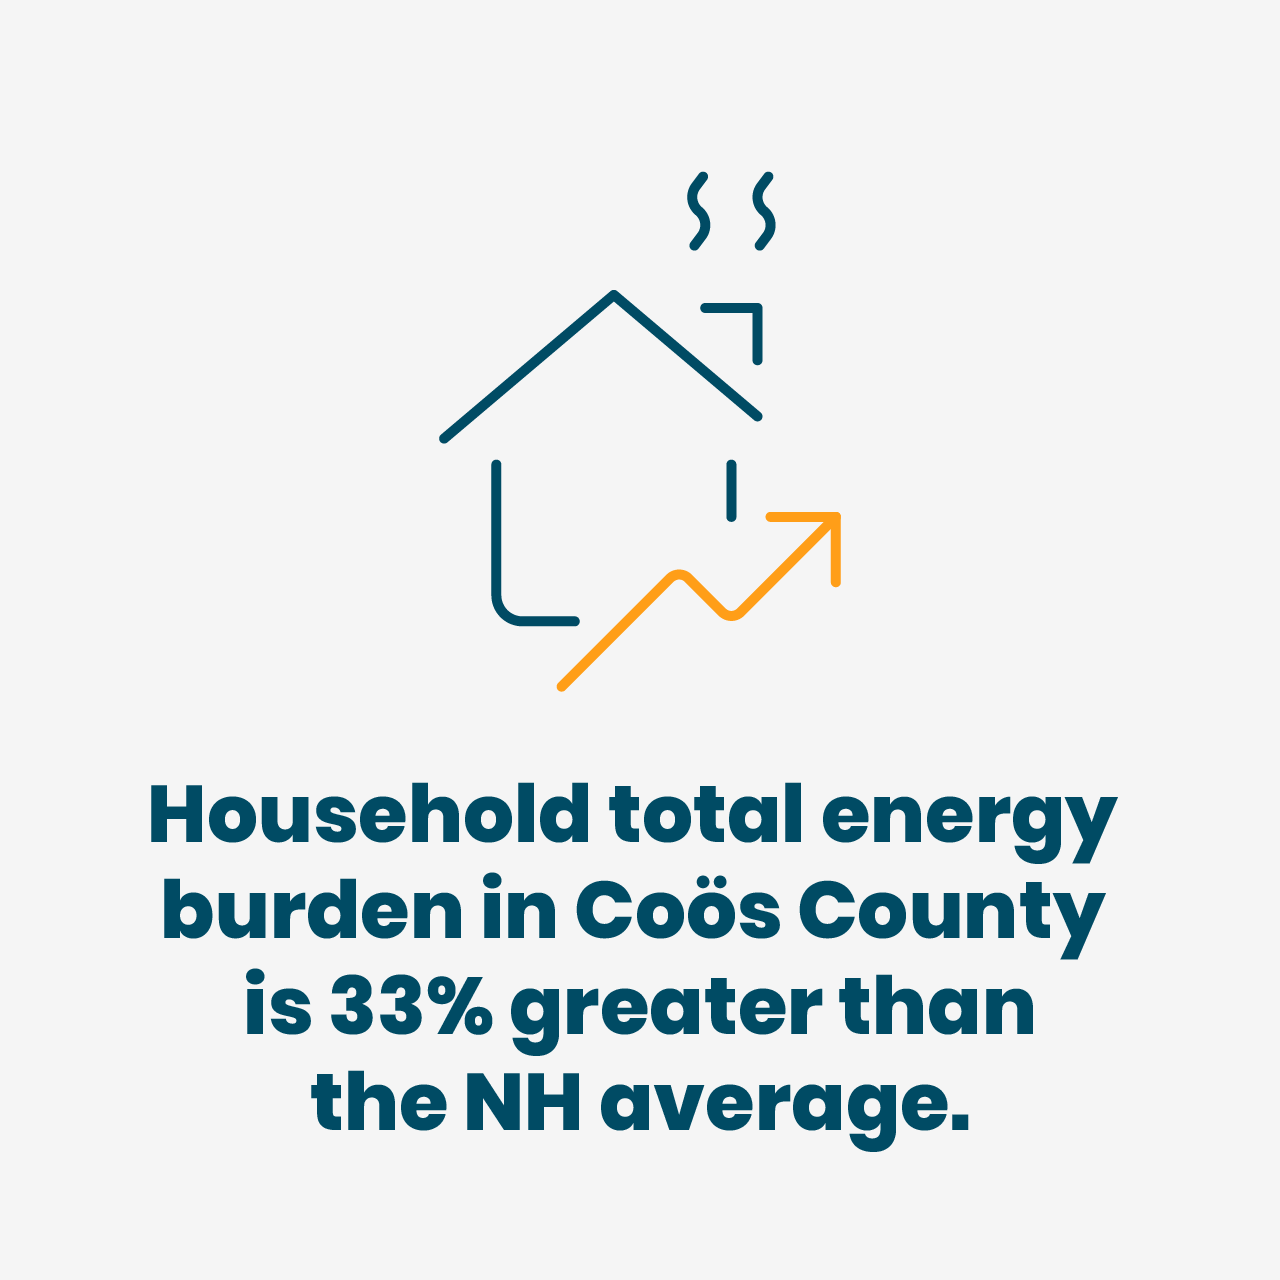 Household total energy burden in Coos County is 33% greater than the NH average